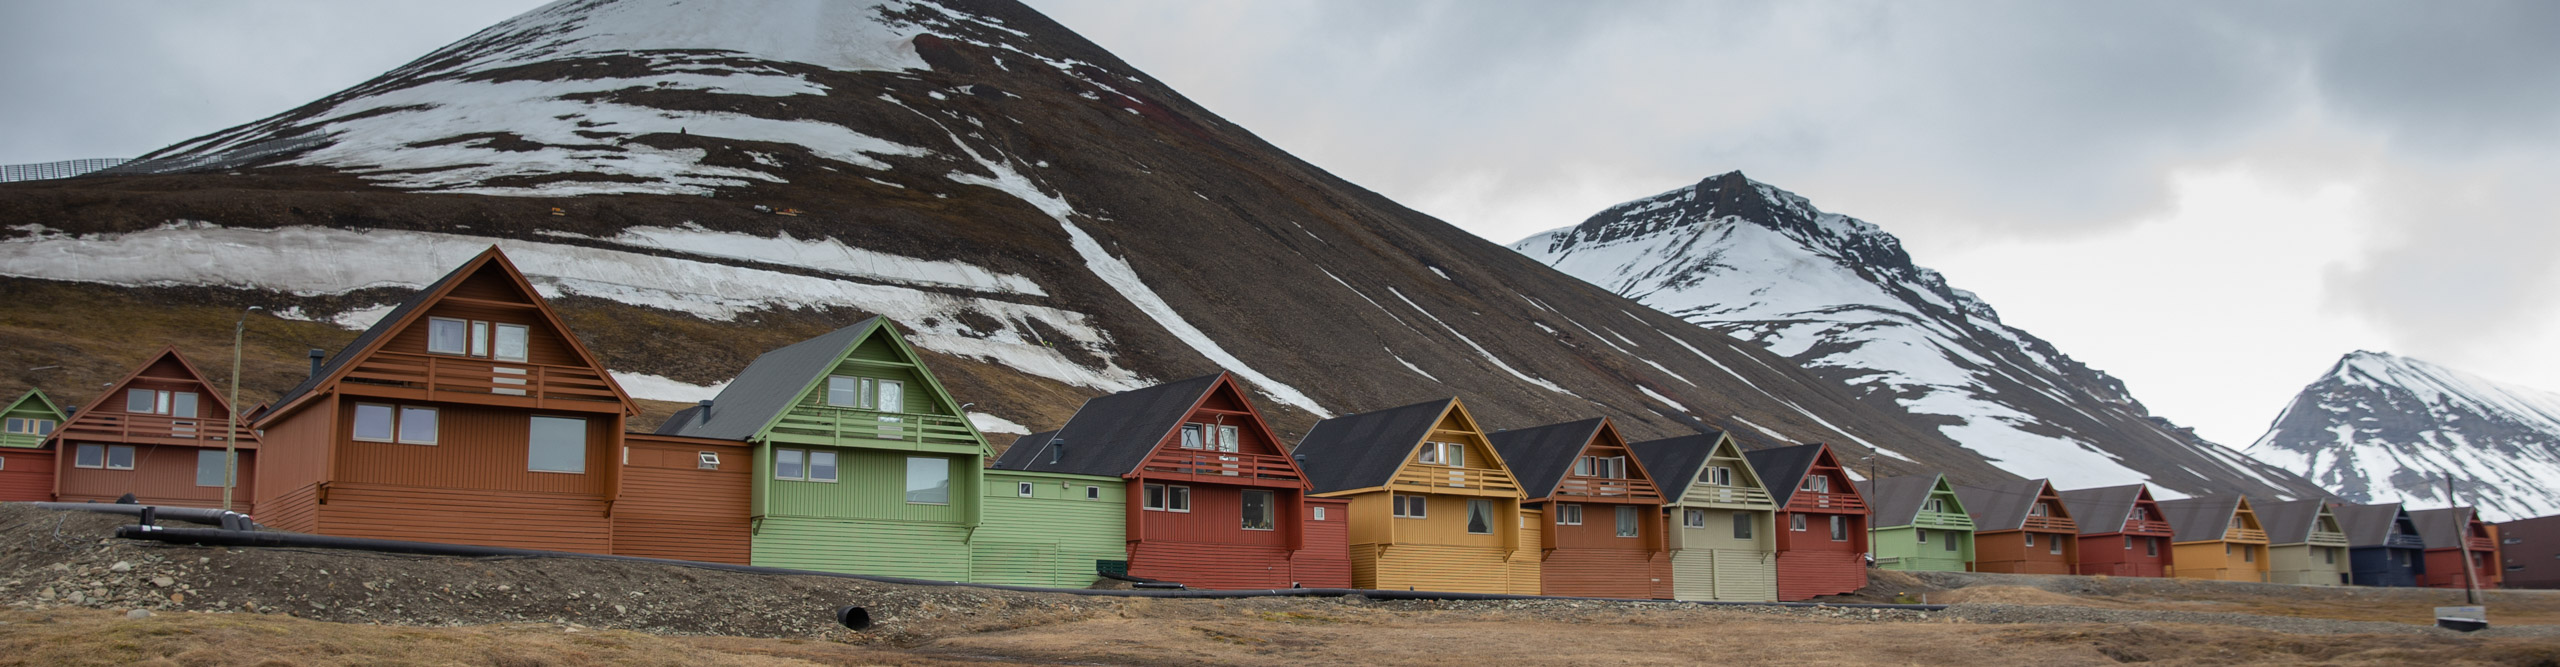 Buildings on shoreline with snowy mountains behind in the Arctic on a cloudy day